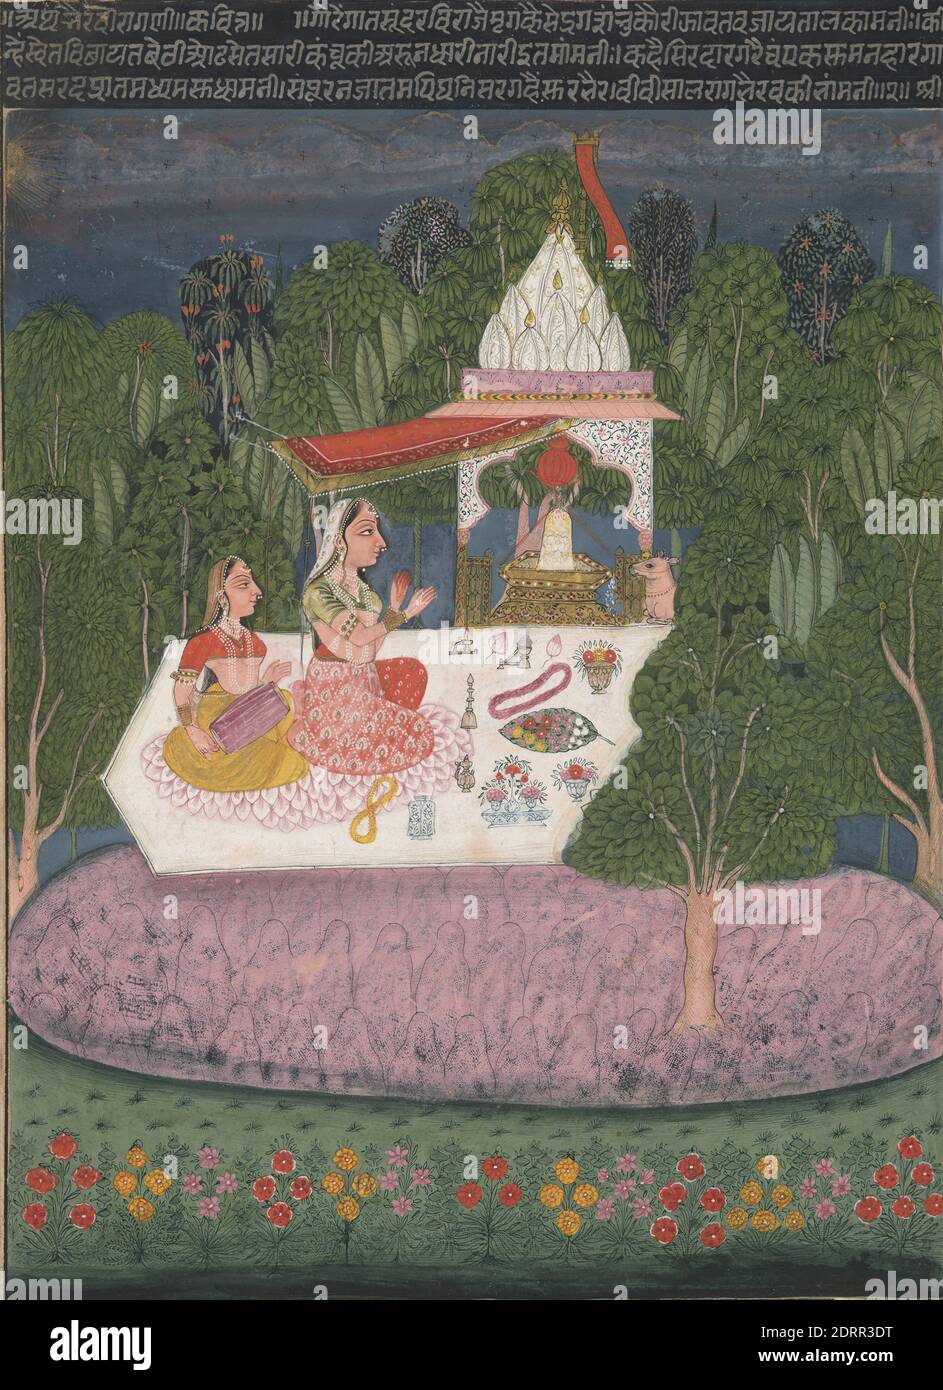 Artist: Bundi School, Ragini Bhairavi, from a Garland of Musical Modes (Ragamala) manuscript, ca. 1760–70, Opaque watercolor on paper, 8 1/2 × 10 3/4 in. (21.6 × 27.3 cm), The intricate patterning and colors of this rendition of Ragini Bhairavi create a richly textured surface. The strategic use of gold pigment draws the viewer’s attention to fine details such as the base of the idol in the center, while the white temple and courtyard stand out against the surrounding dark green foliage. , Made in Rajasthan, India, Indian, Rajasthan, Bundi, India, Mughal dynasty (1526–1857), Paintings Stock Photo